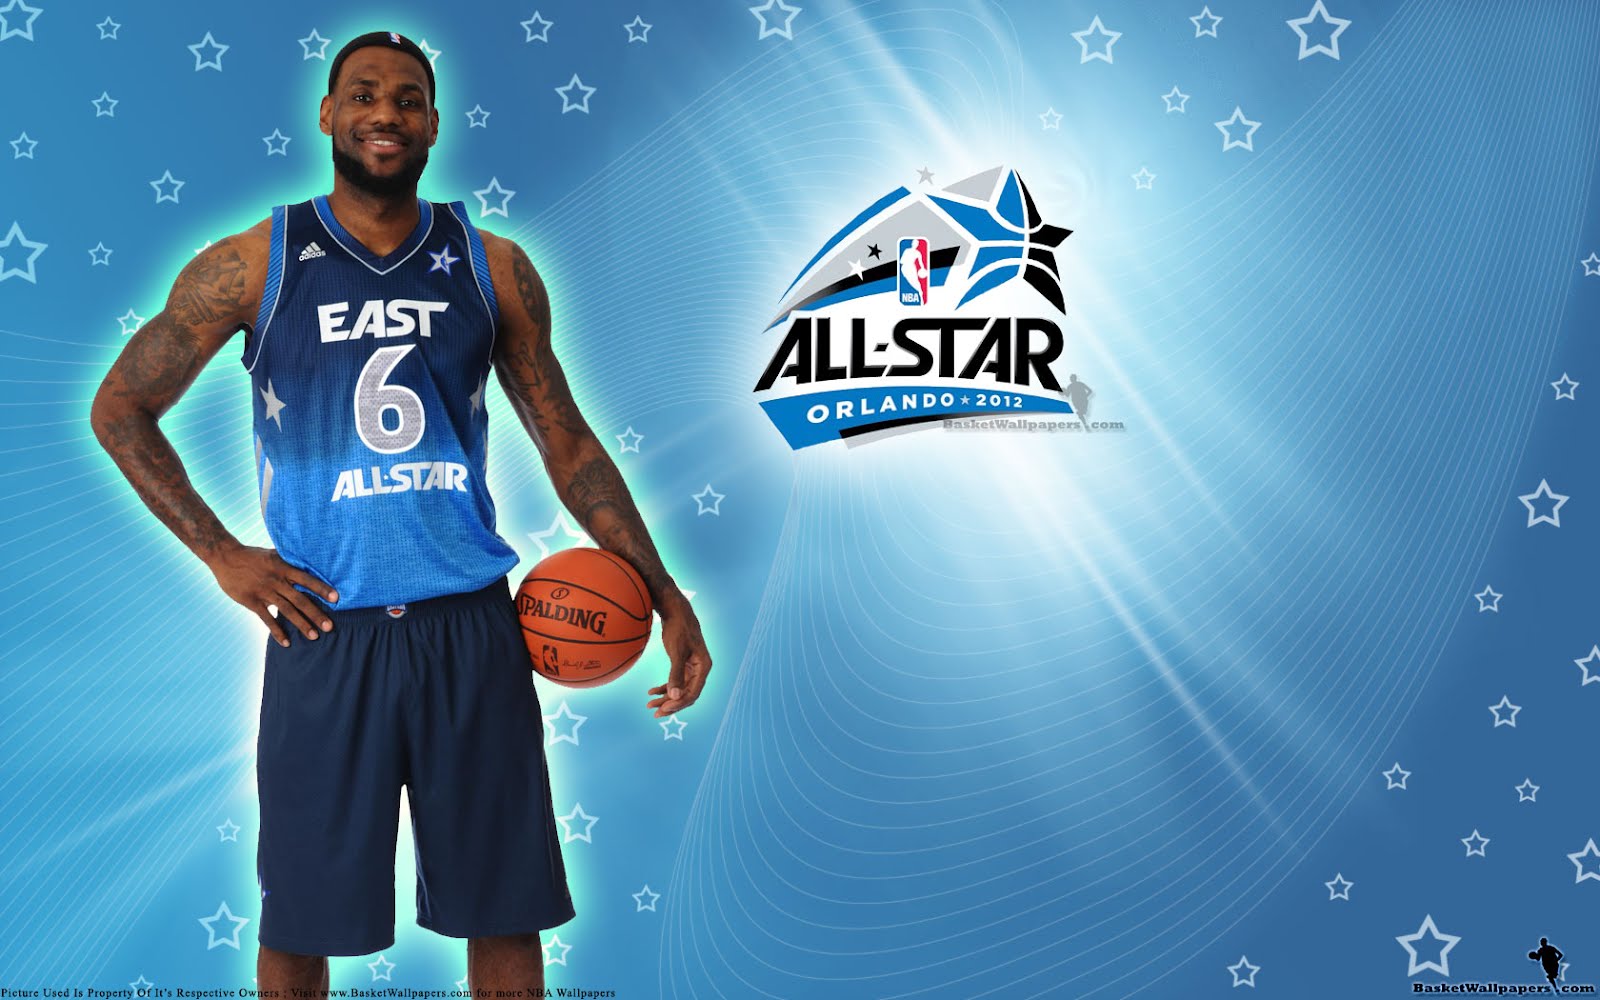 Wallpaper With Nba All Star Weekend Logo In Background Of Lebron